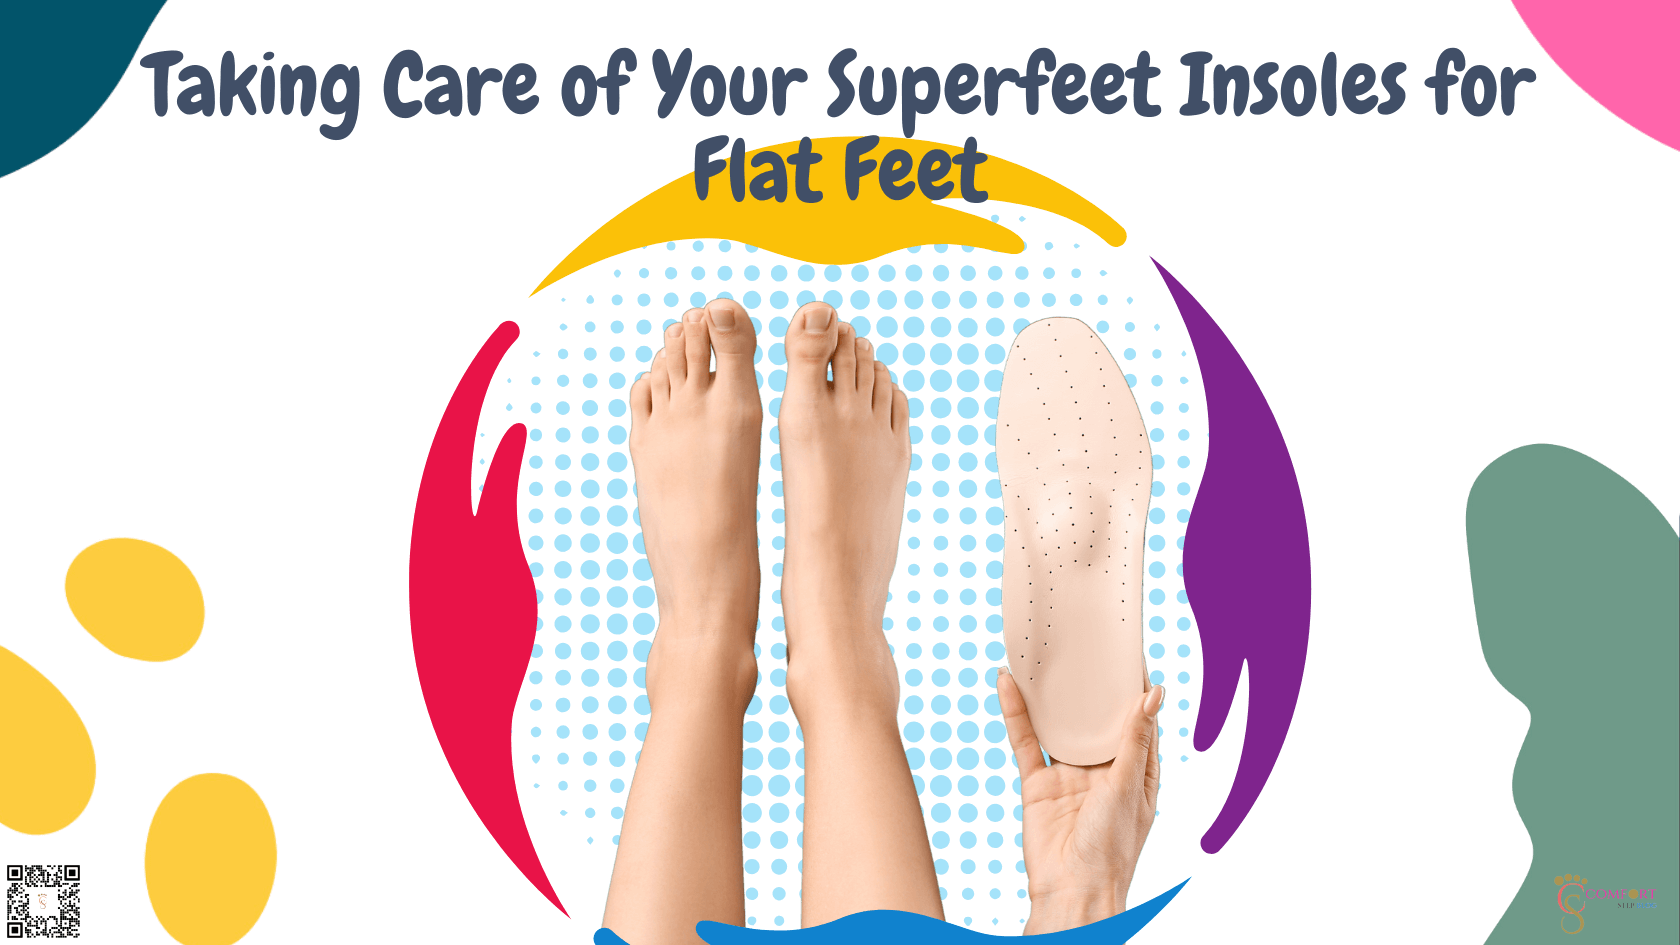 Taking Care of Your Superfeet Insoles for Flat Feet